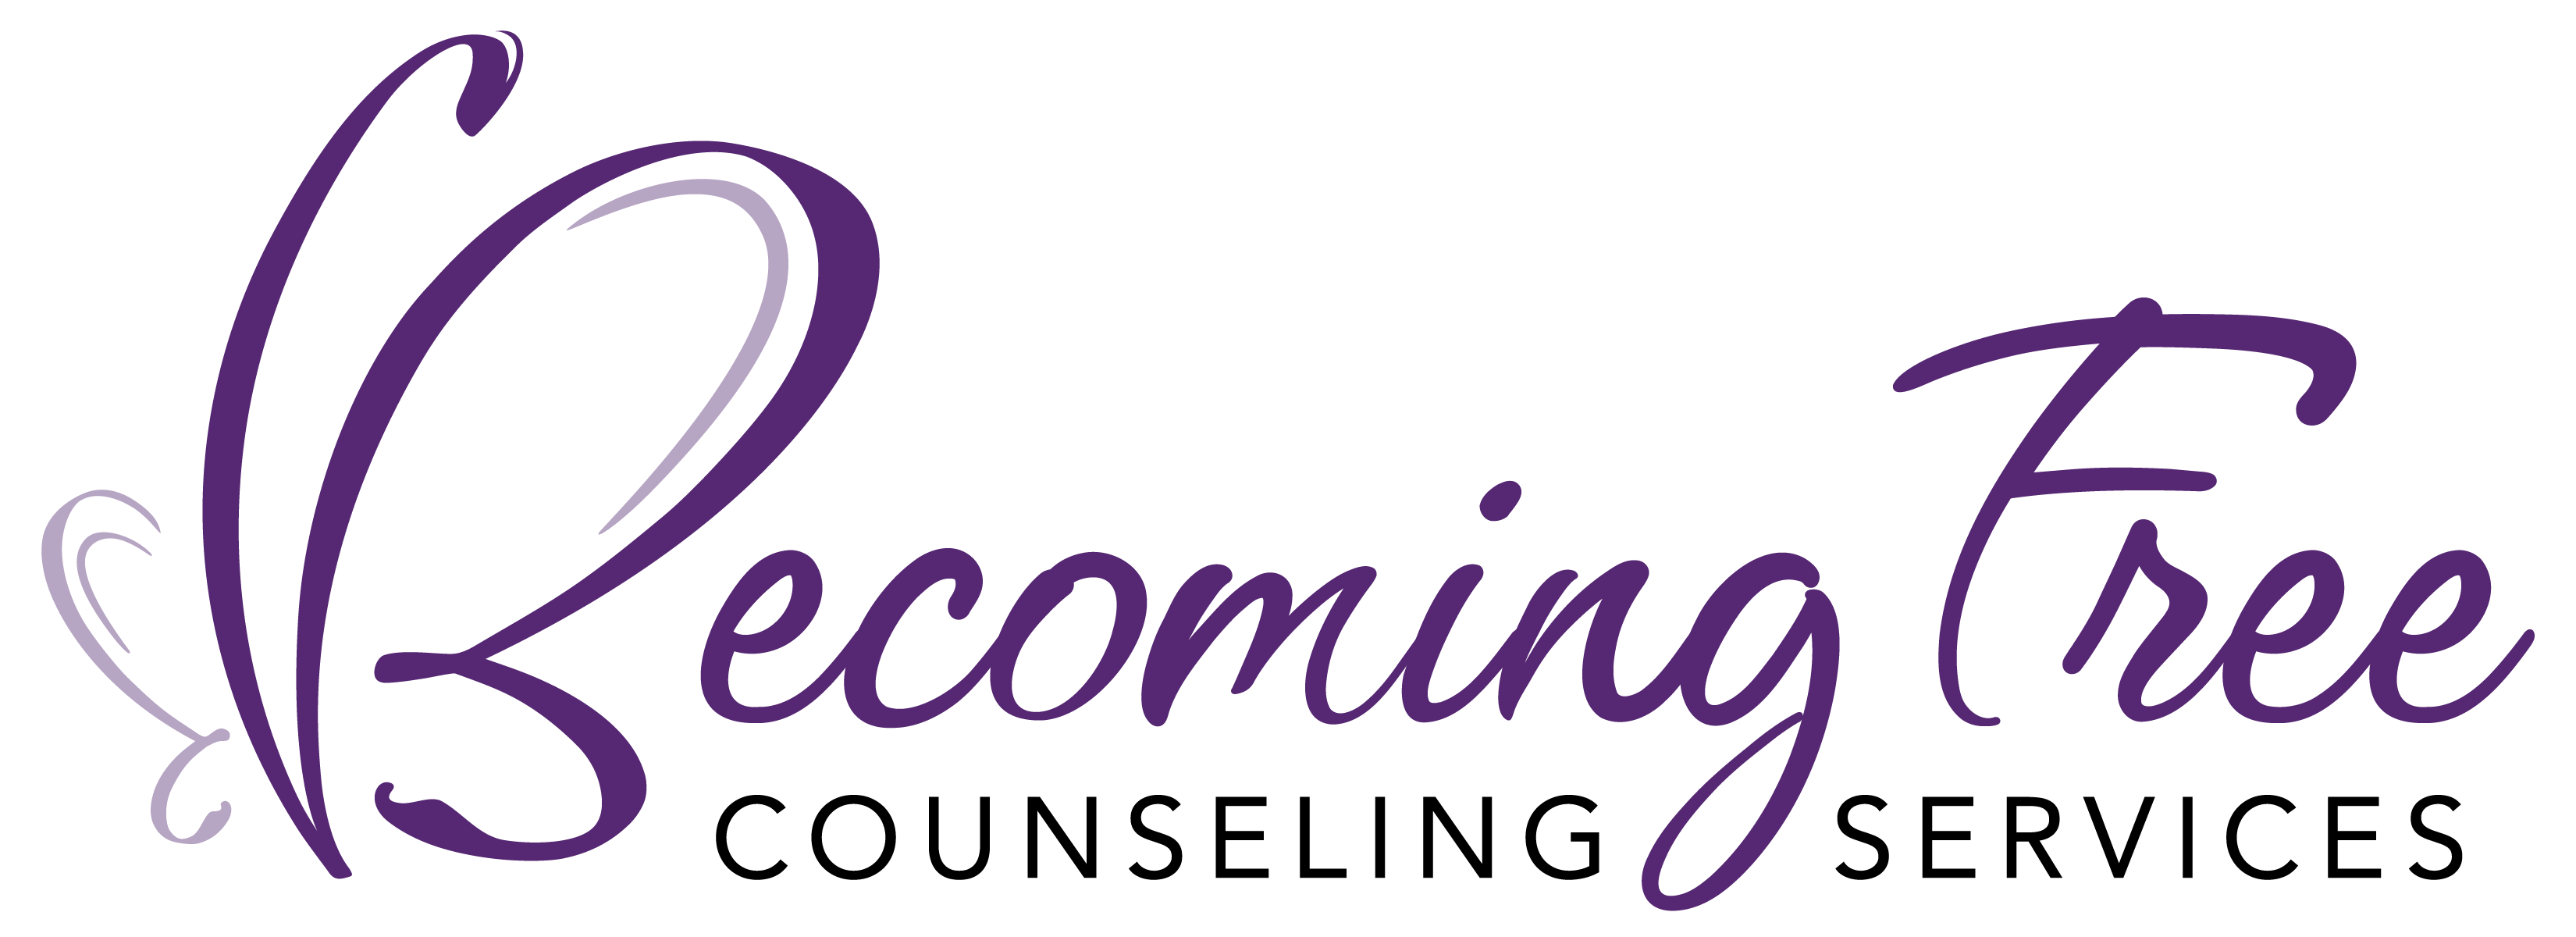 Becoming Free Counseling Services Logo